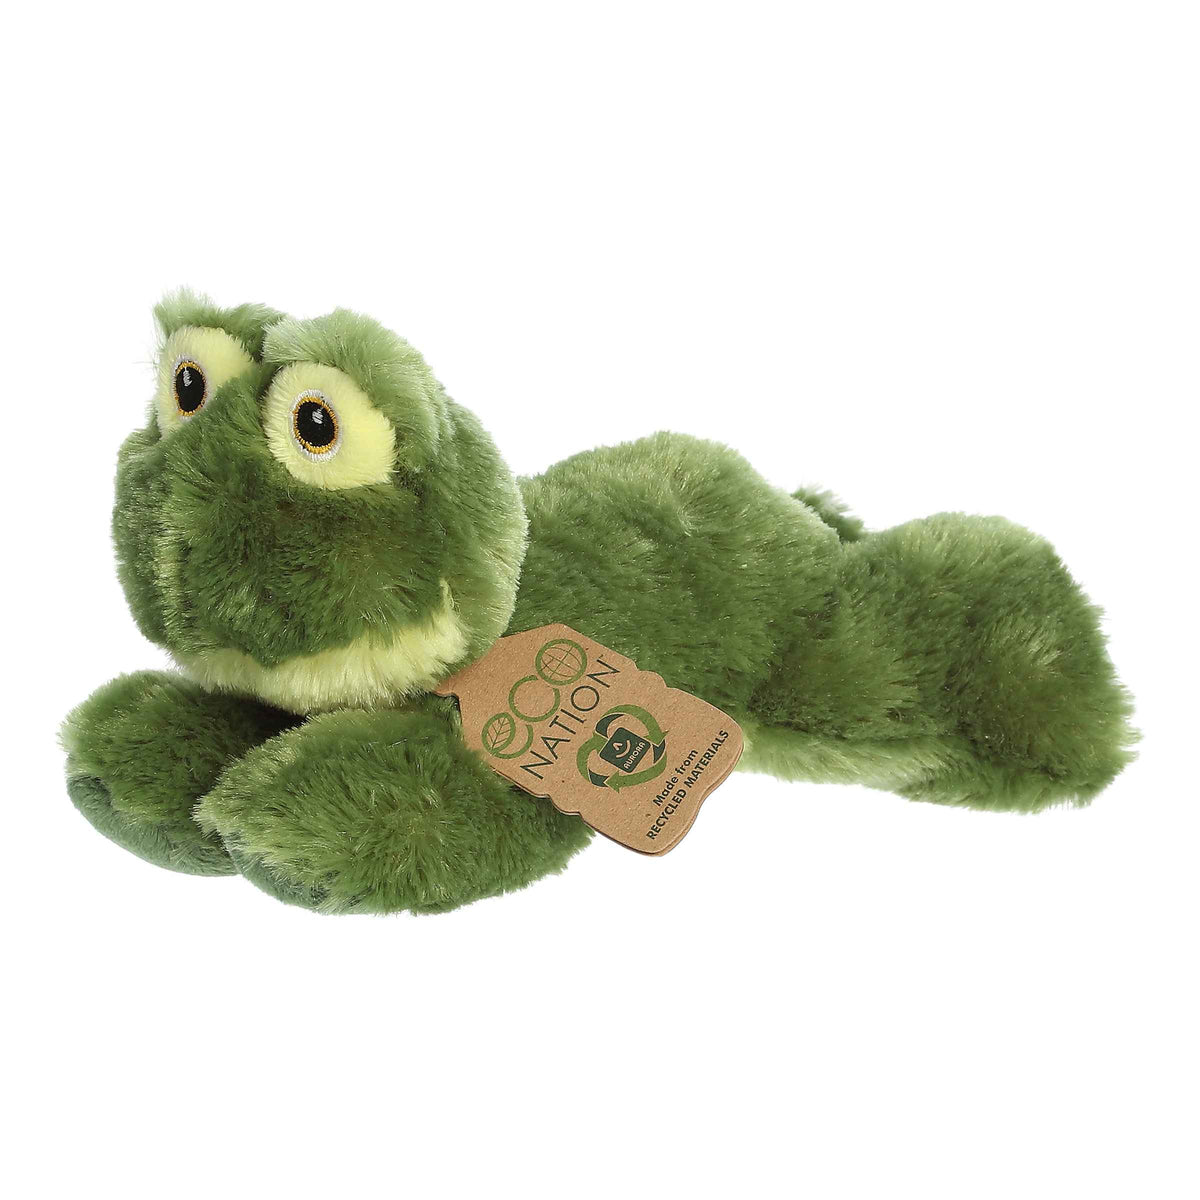 8'' American Bullfrog plush from Eco Softies, soft and adorable, crafted from recycled materials.